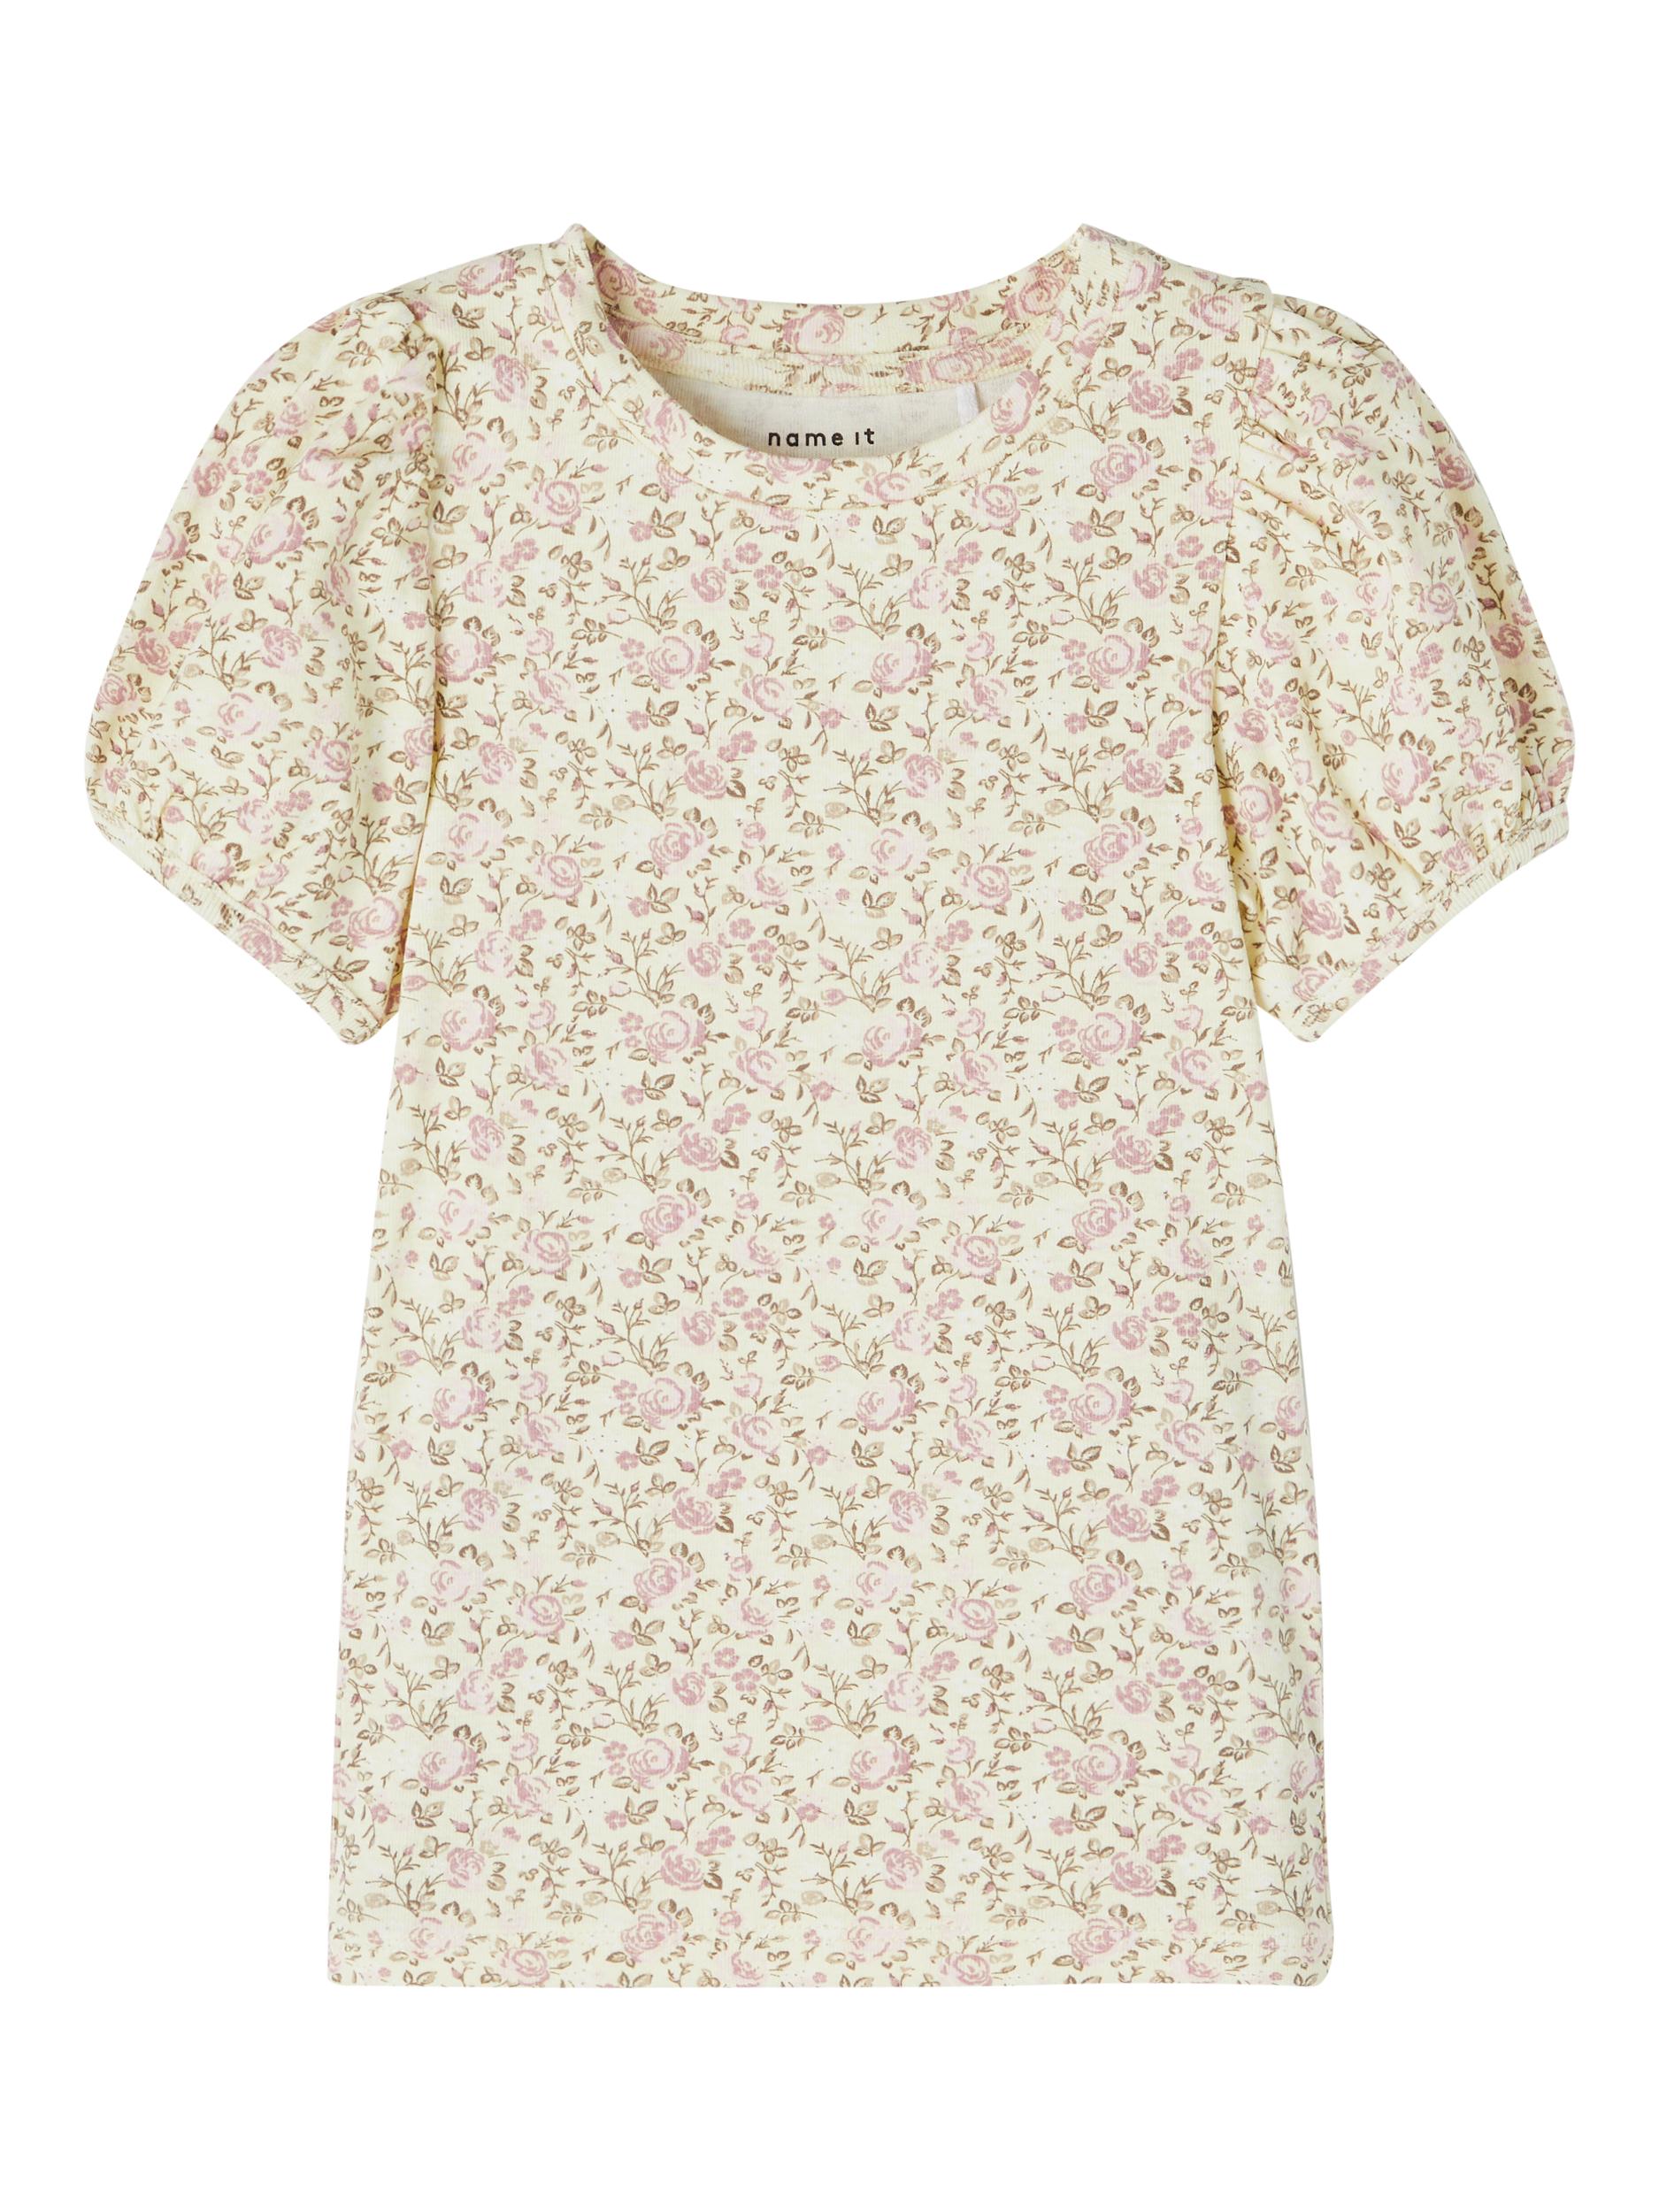 Justice Short Sleeve Top - Lemon Icing Front View